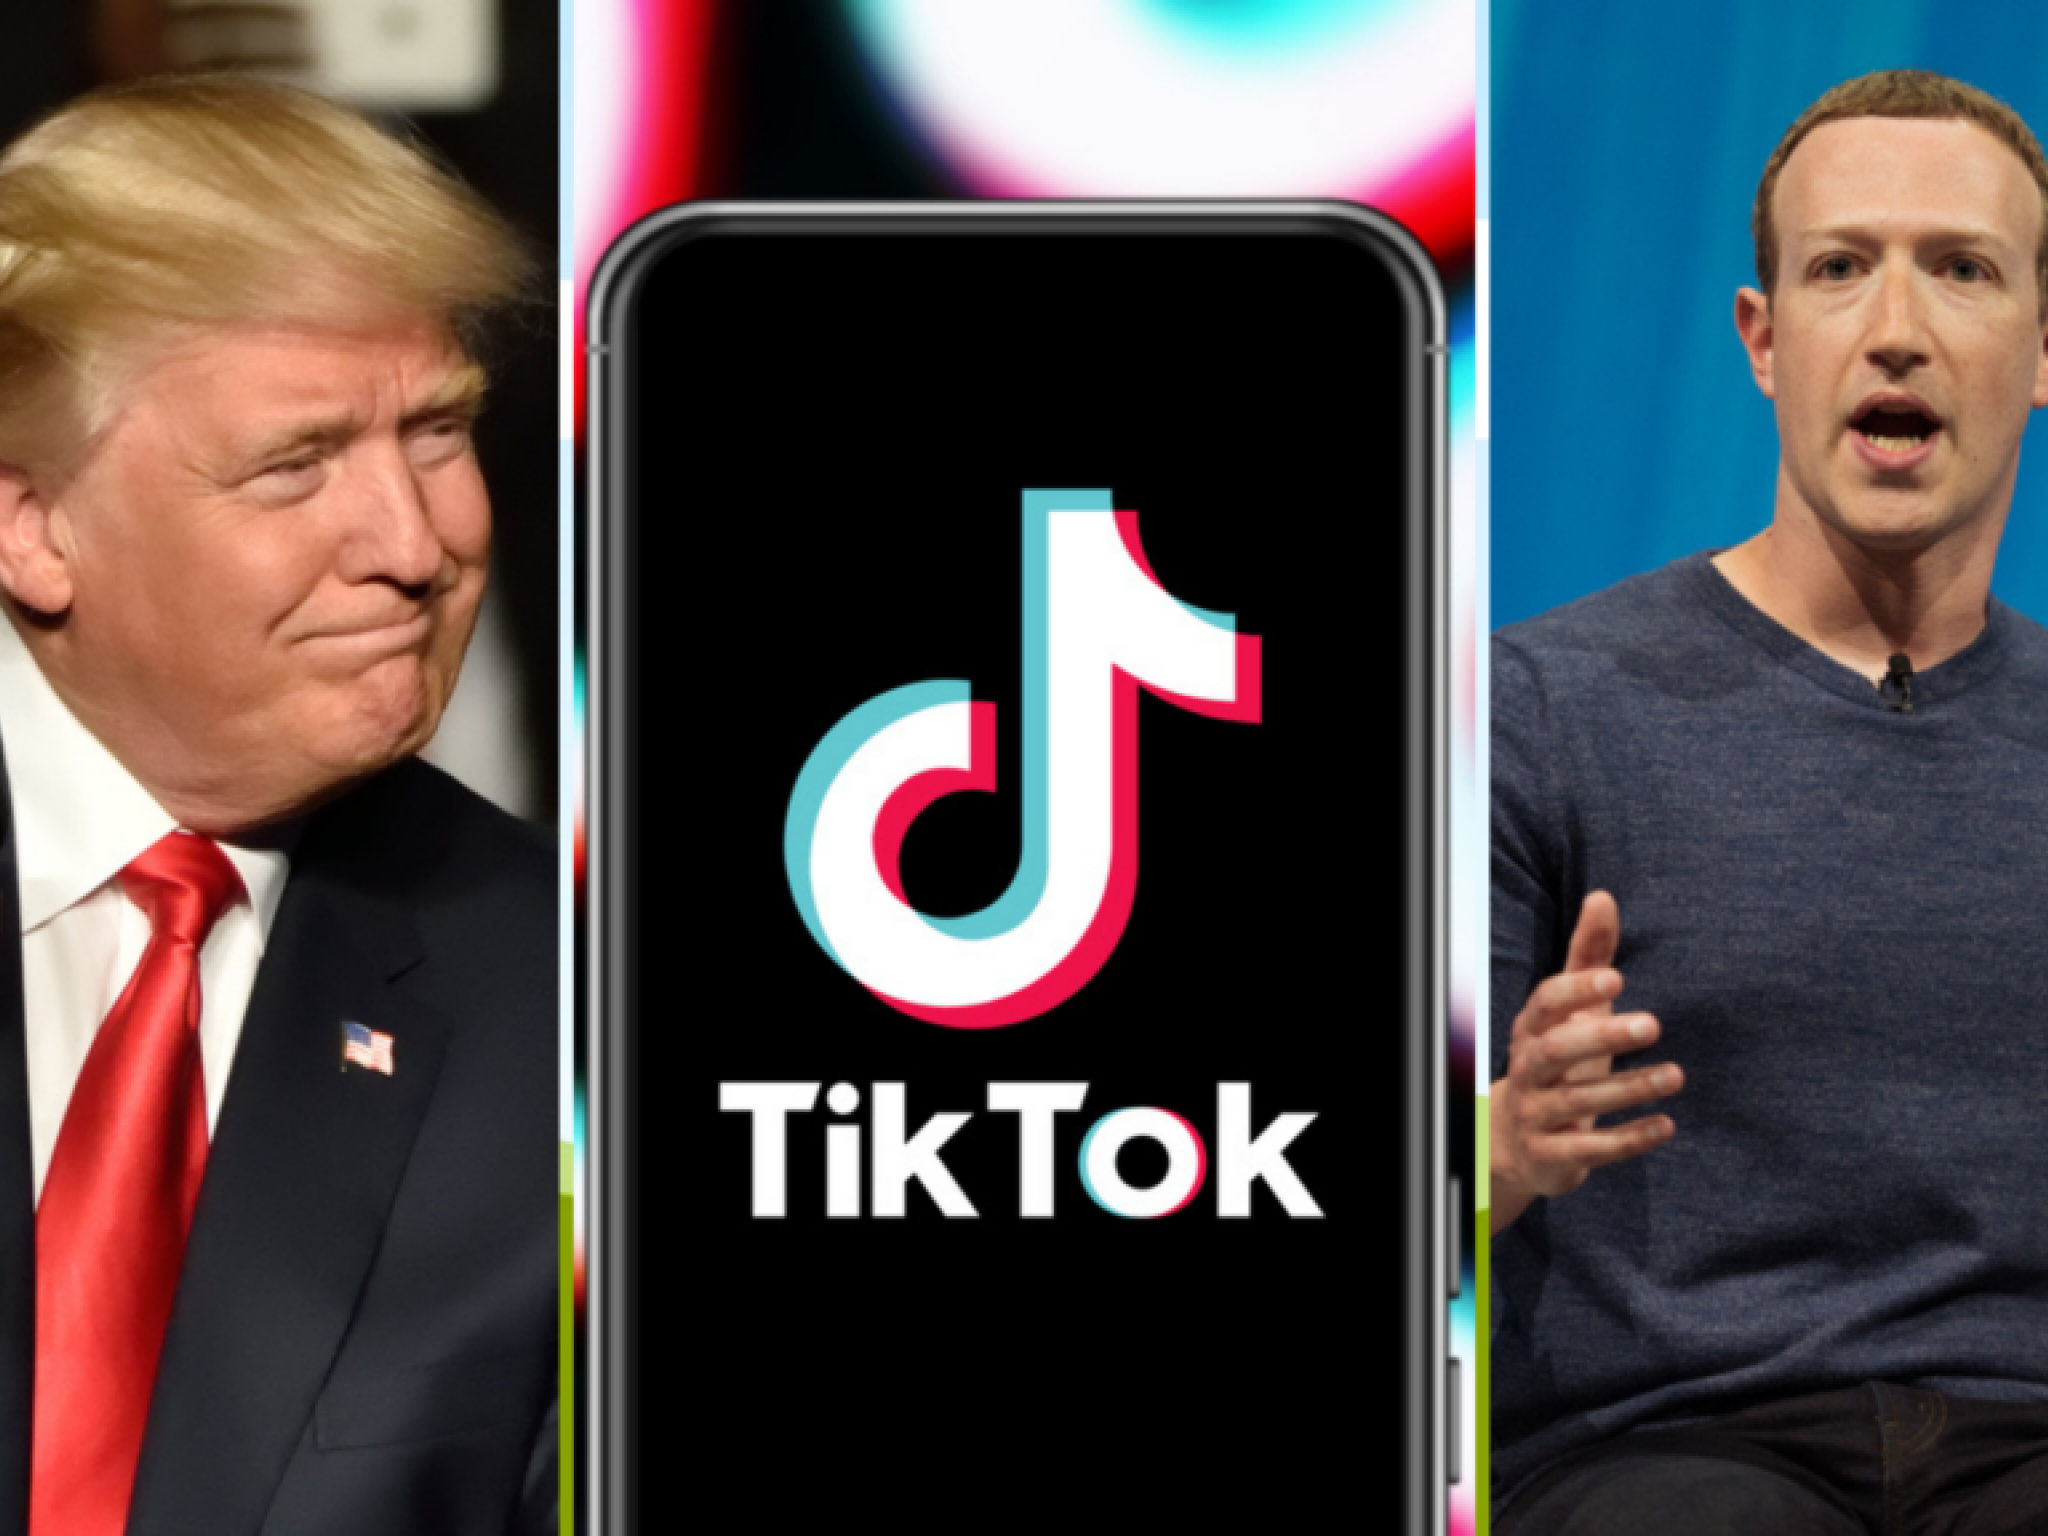  trump-for-tiktok-competition-to-mark-zuckerberg-if-you-dont-have-tiktok-you-have-facebook-and-instagram 